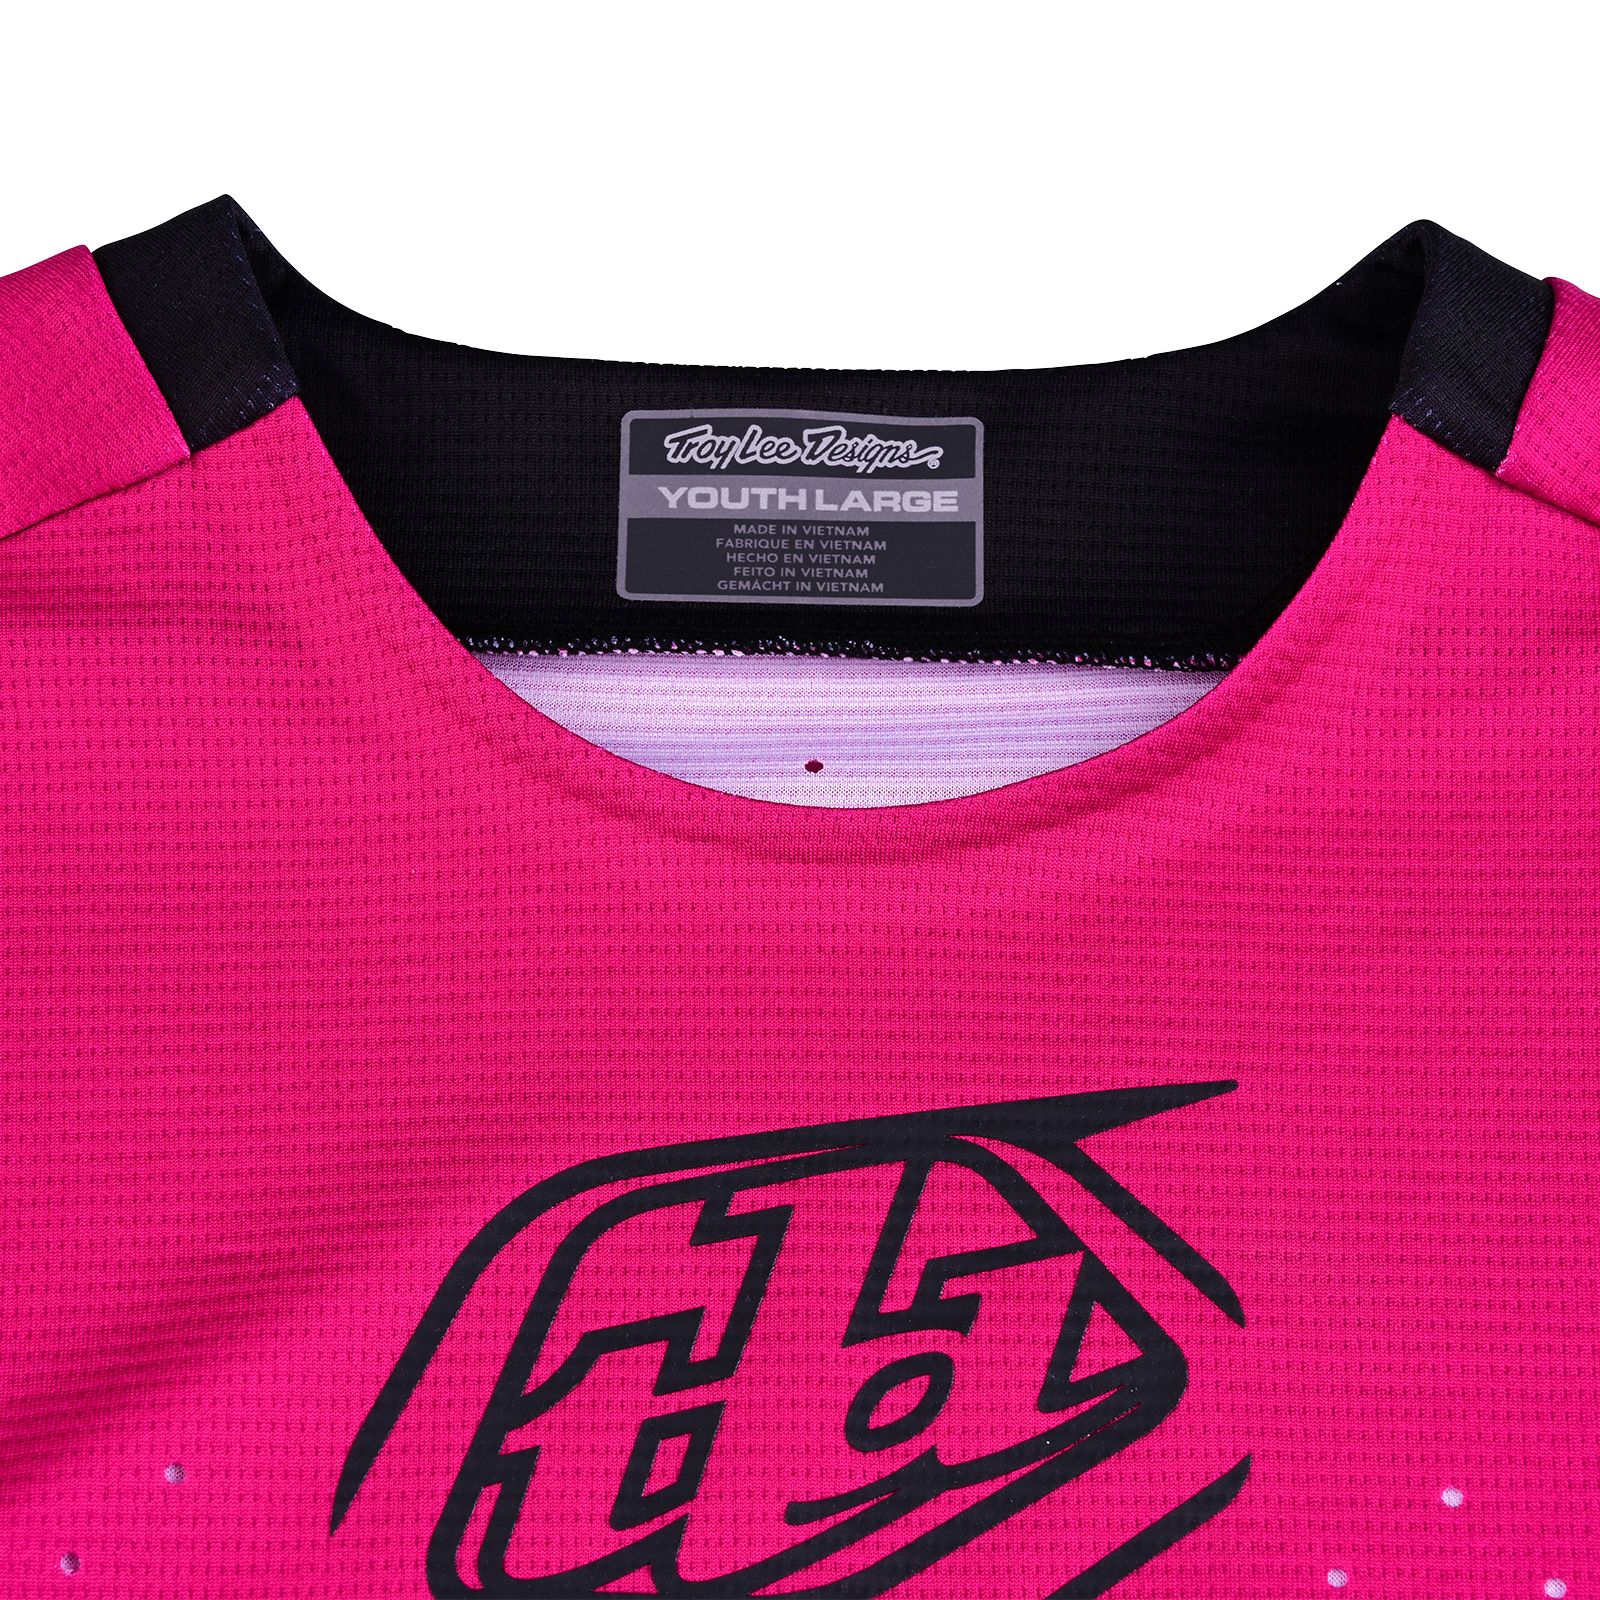 Troy Lee Youth Sprint Jersey